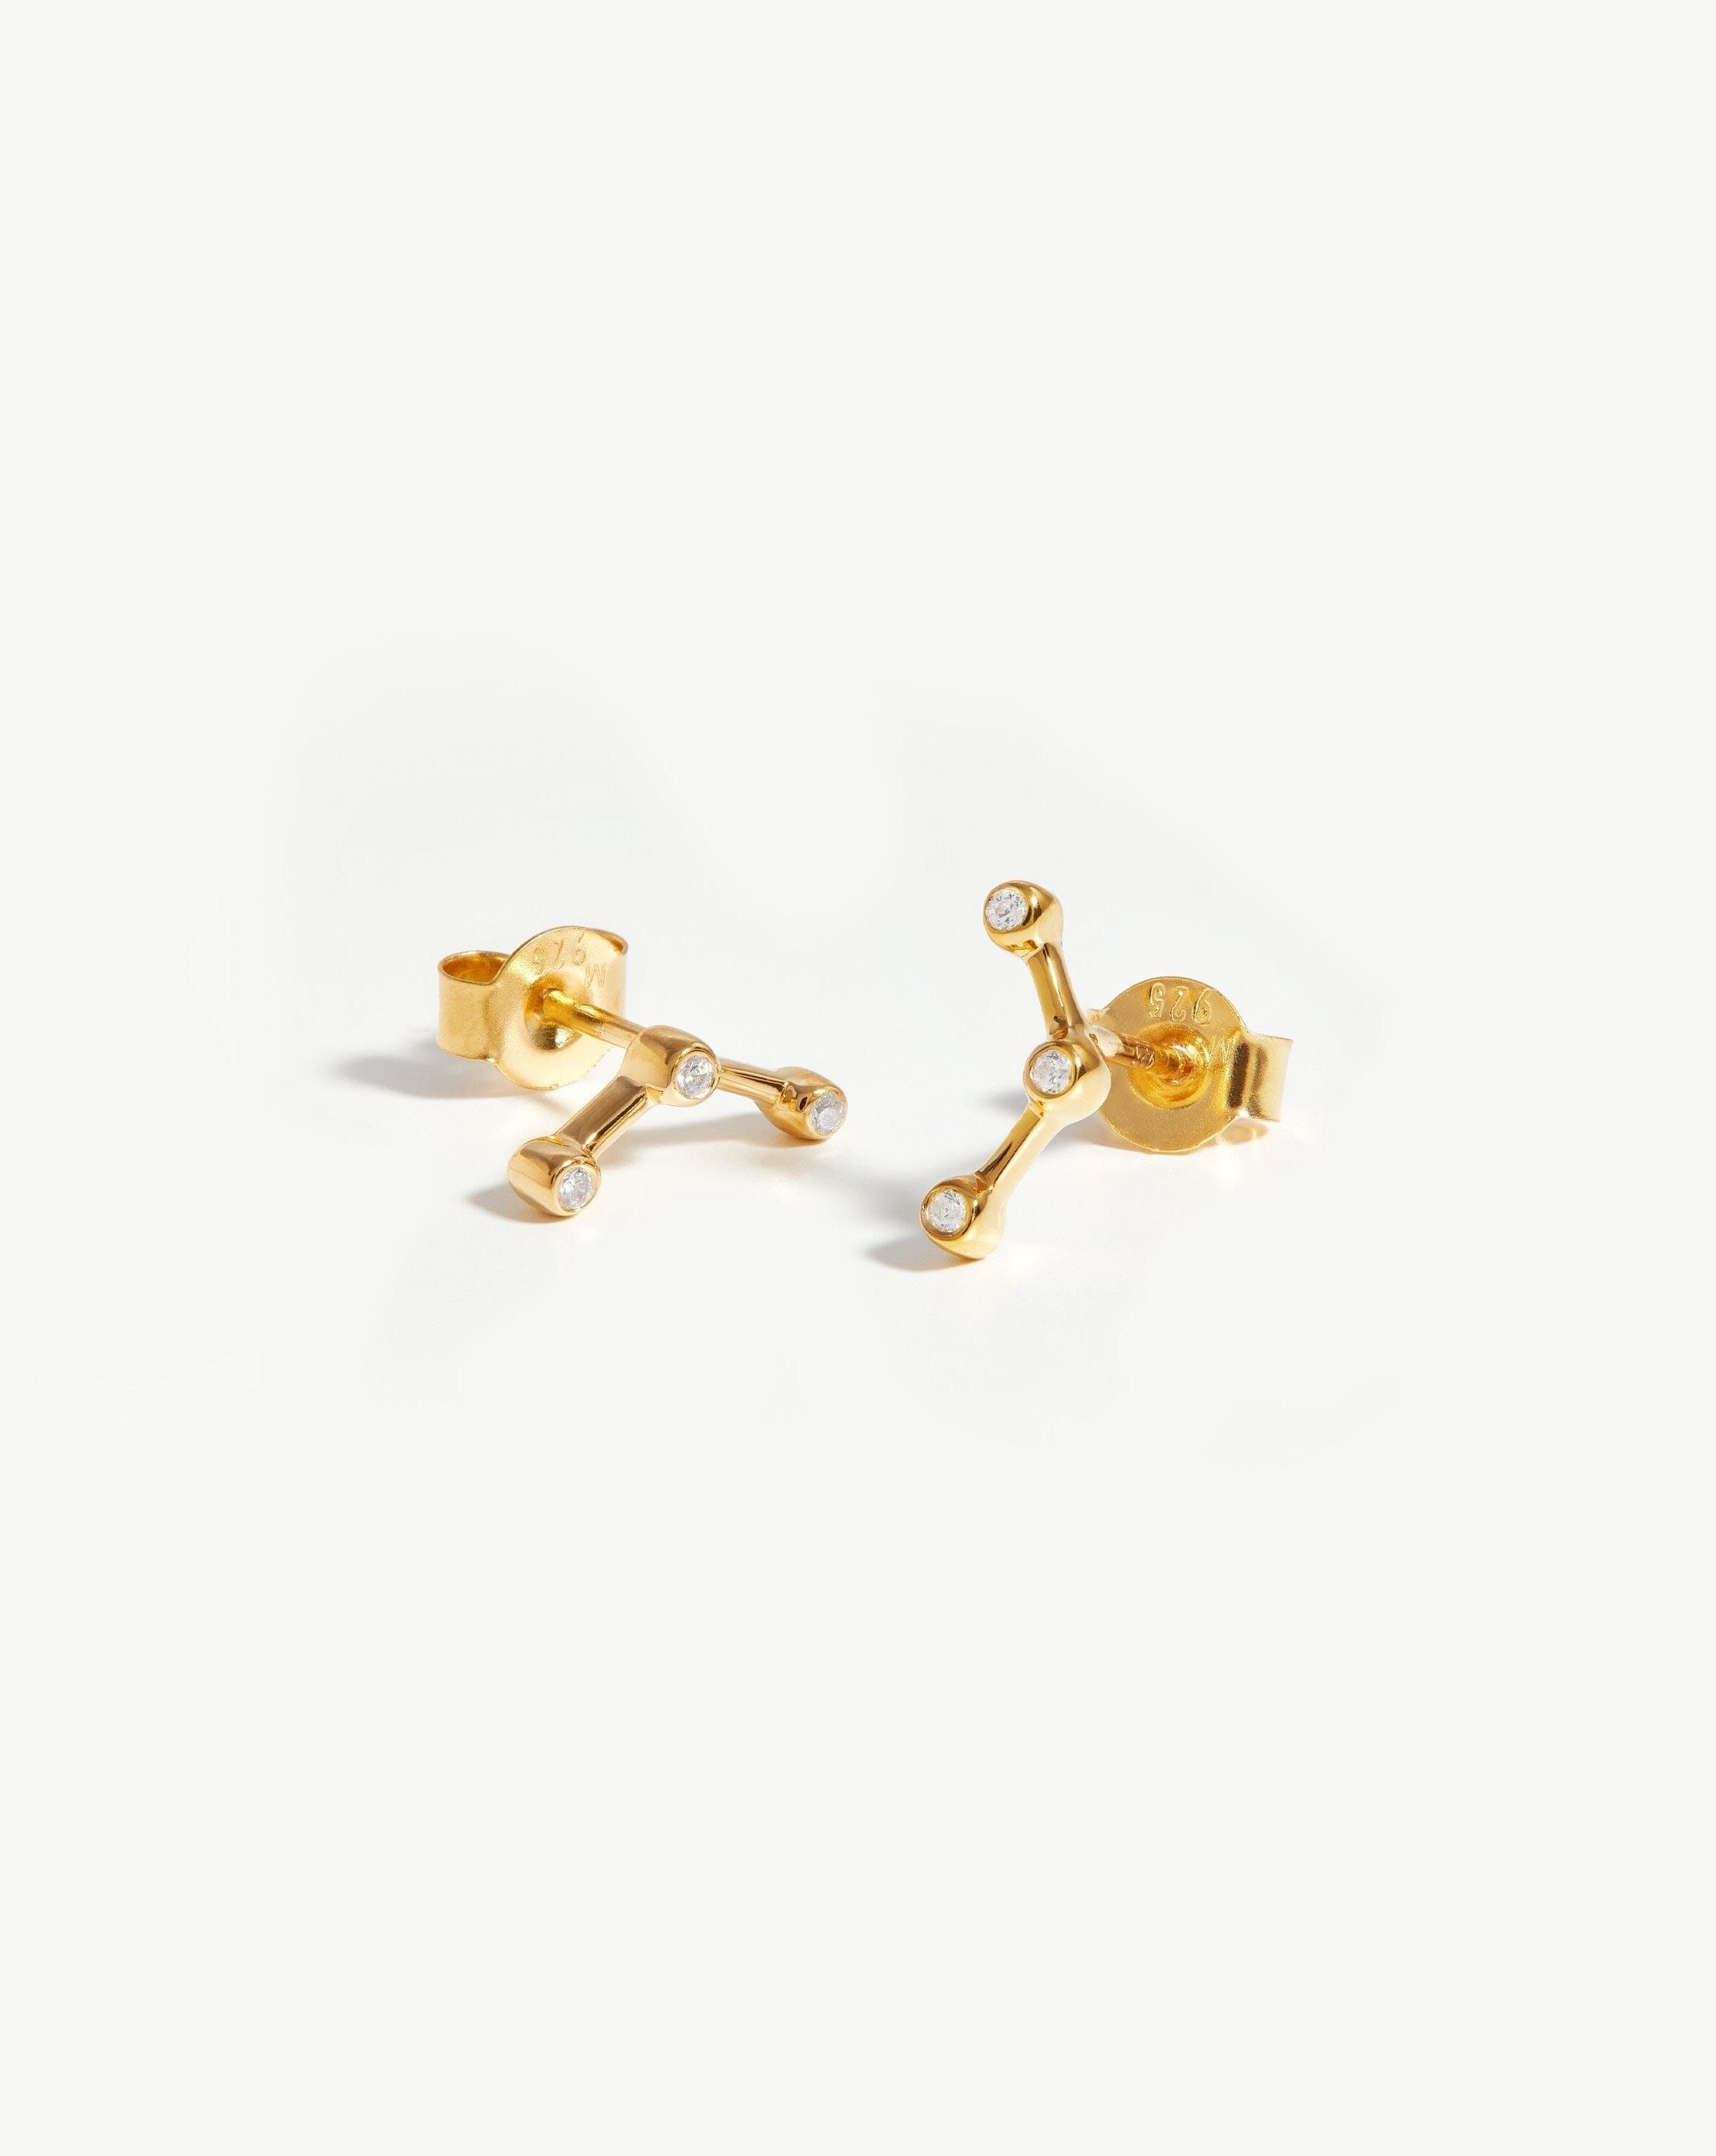 Pave Trilogy Stud Earrings | 18ct Gold Plated Vermeil/Cubic Zirconia Earrings Missoma 